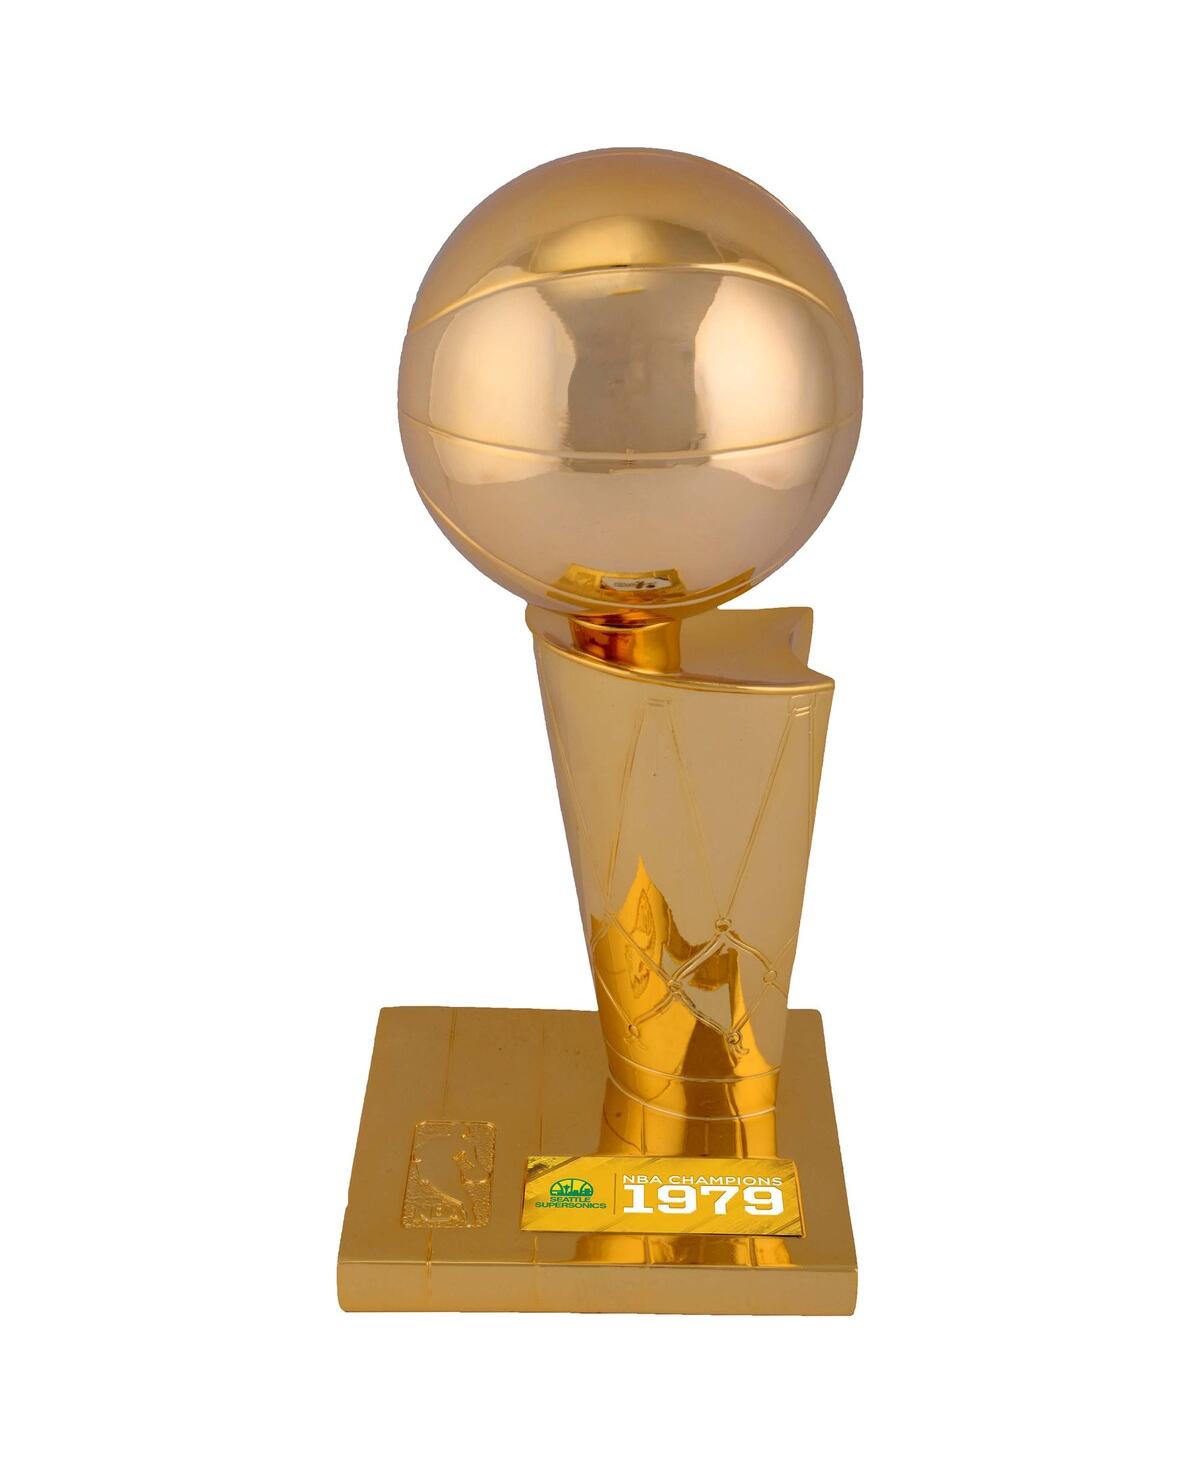 Seattle SuperSonics 1979 Nba Finals Champions 12" Replica Larry O'Brien Trophy with Sublimated Plate - Gold